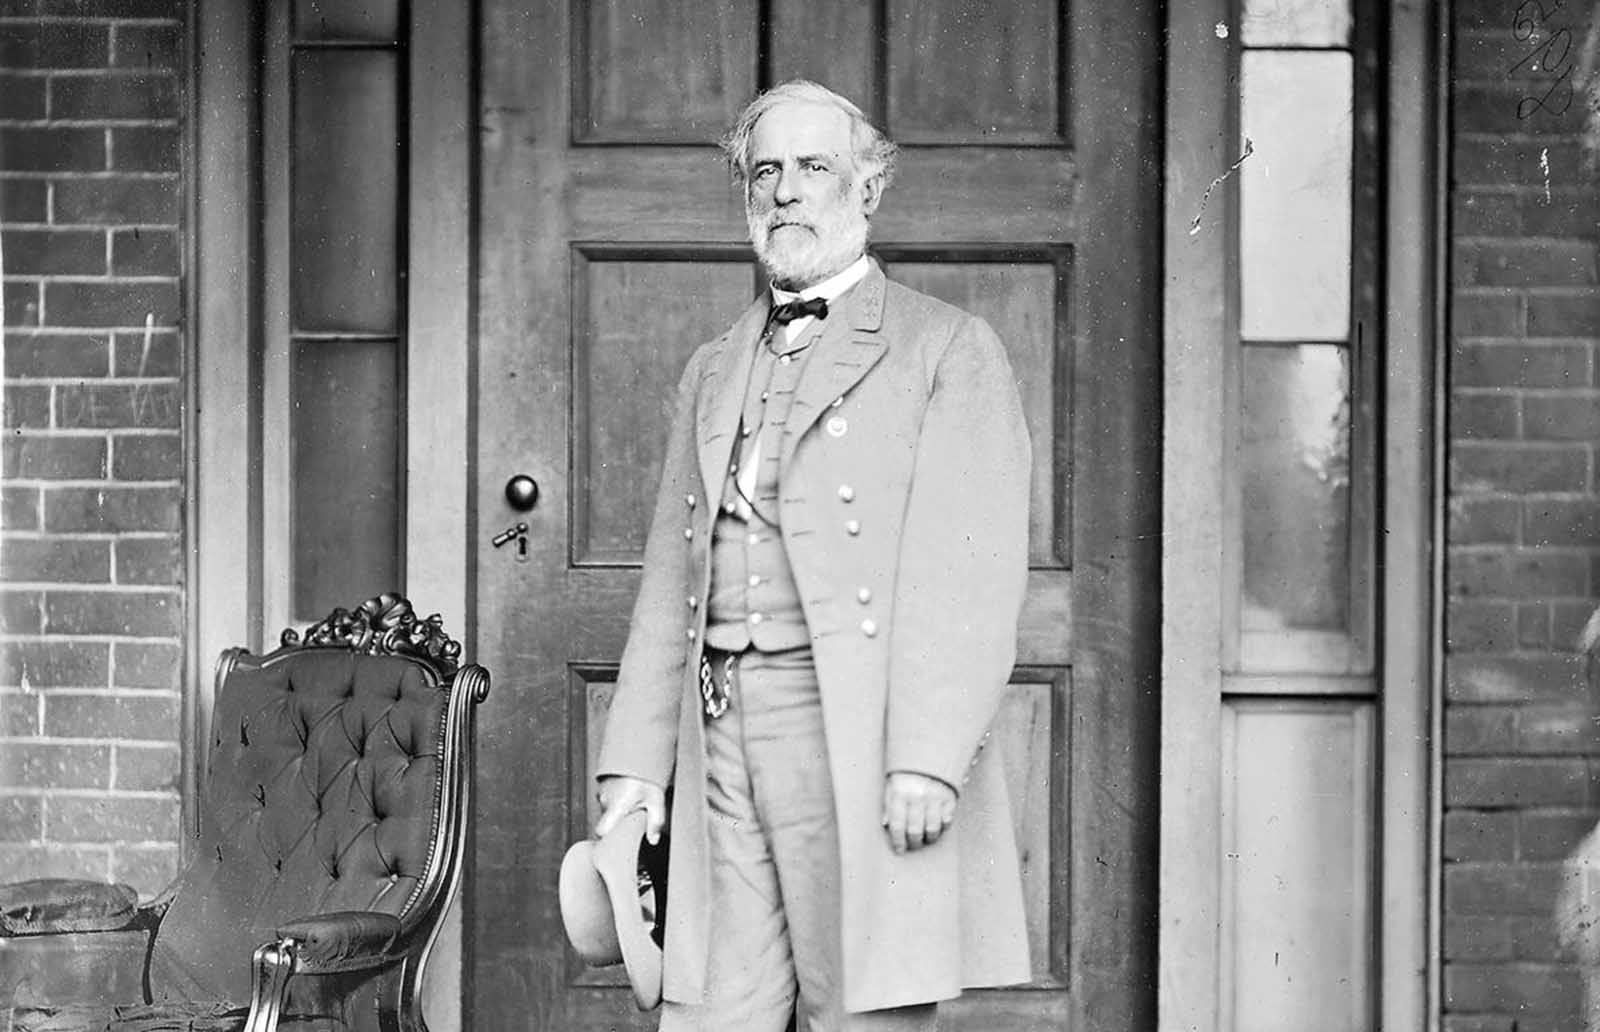 Confederate General Robert E. Lee poses in a late April 1865 portrait taken by Mathew Brady in Richmond, Virginia. By the end of the war, Lee had been appointed as general-in-chief of all Confederate forces, having led numerous armies into battle against Union forces during the conflict. It was Lee's surrender to General Ulysses Grant at Appomattox Court House on April 9, 1865 that signaled the end of the war